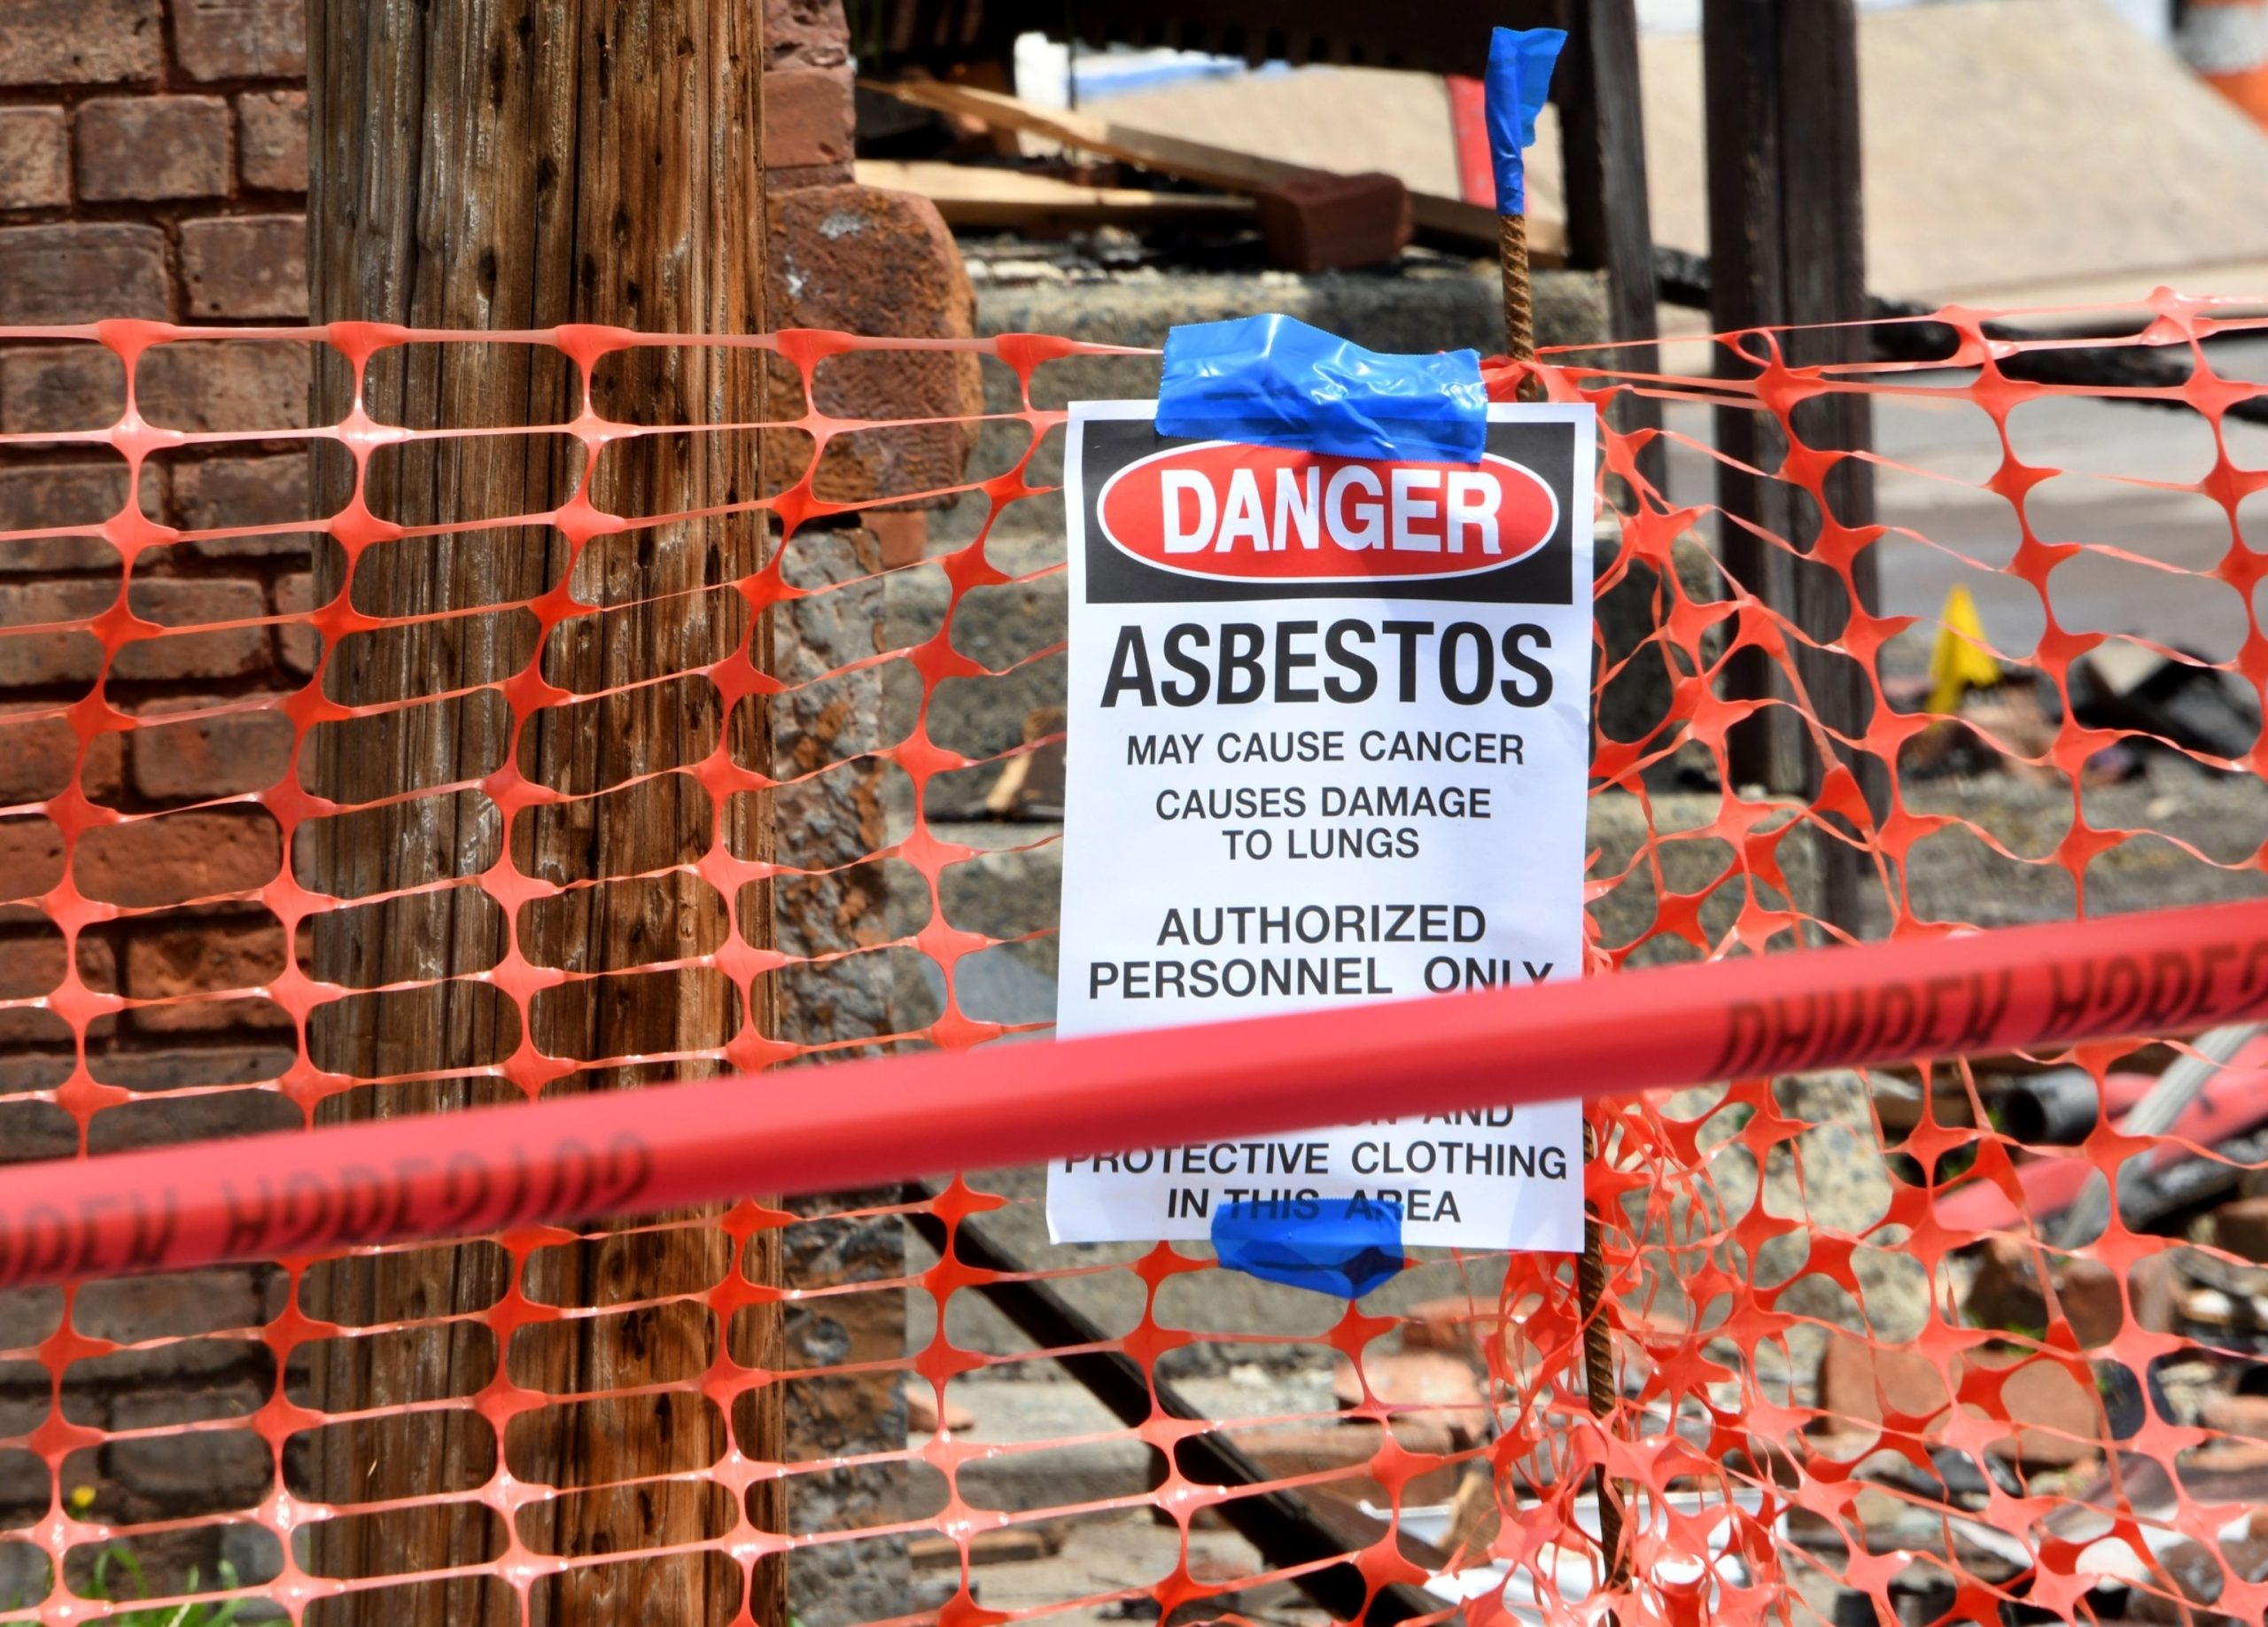 EPA prohibits all remaining uses of asbestos due to cancer risk in the US